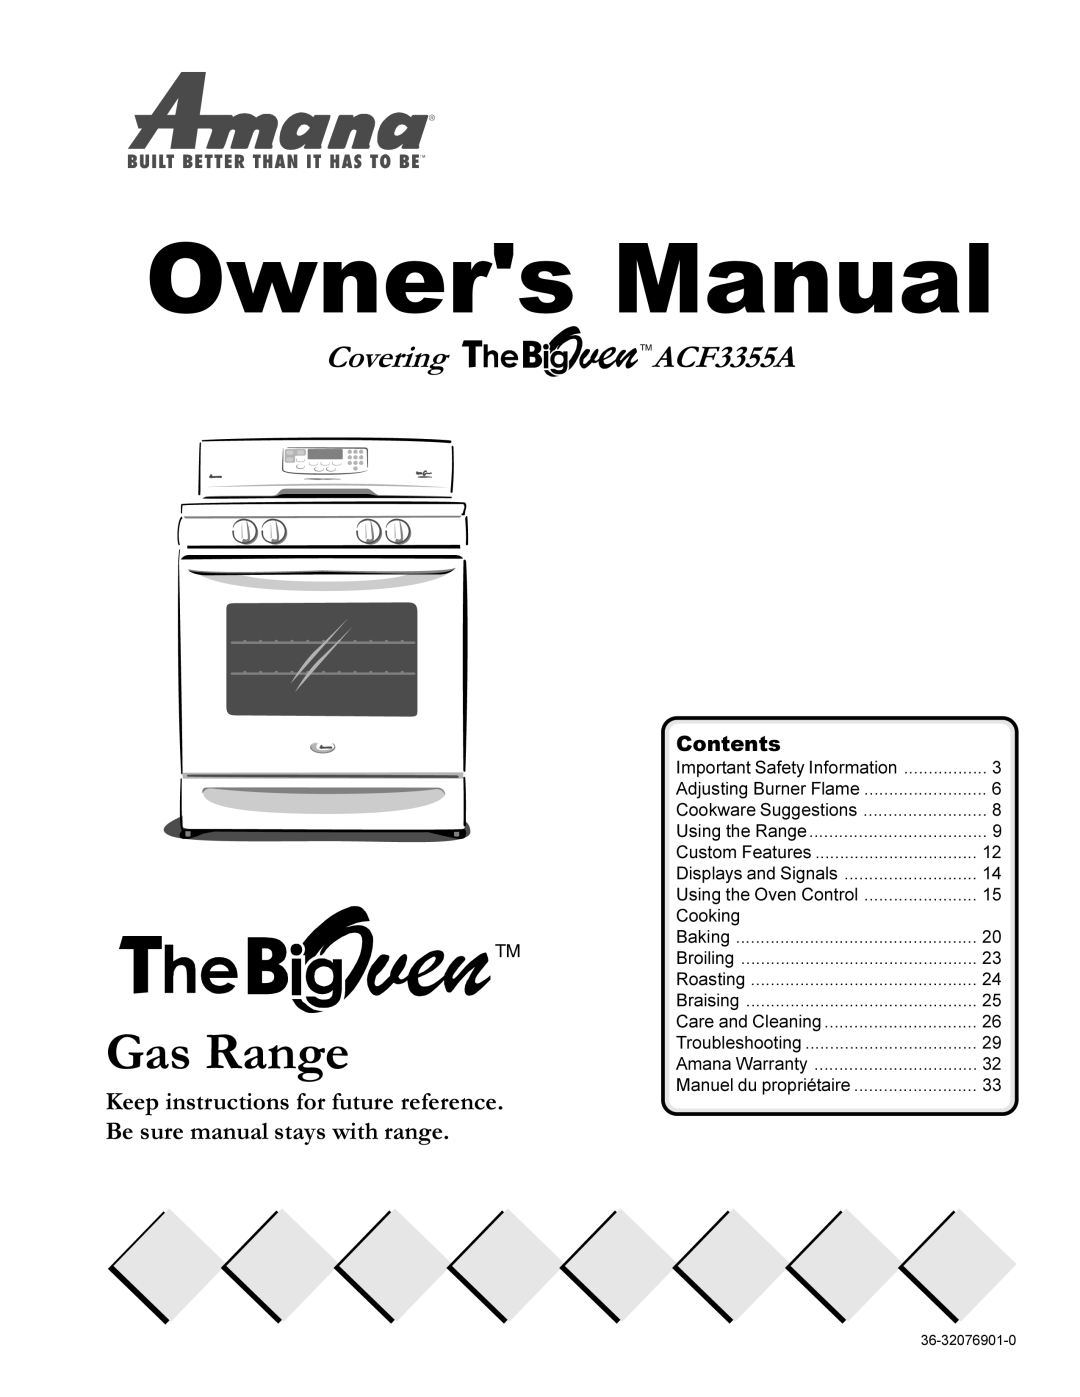 Amana The Big Oven Gas Range owner manual Covering TMACF3355A, Owners Manual, Contents 